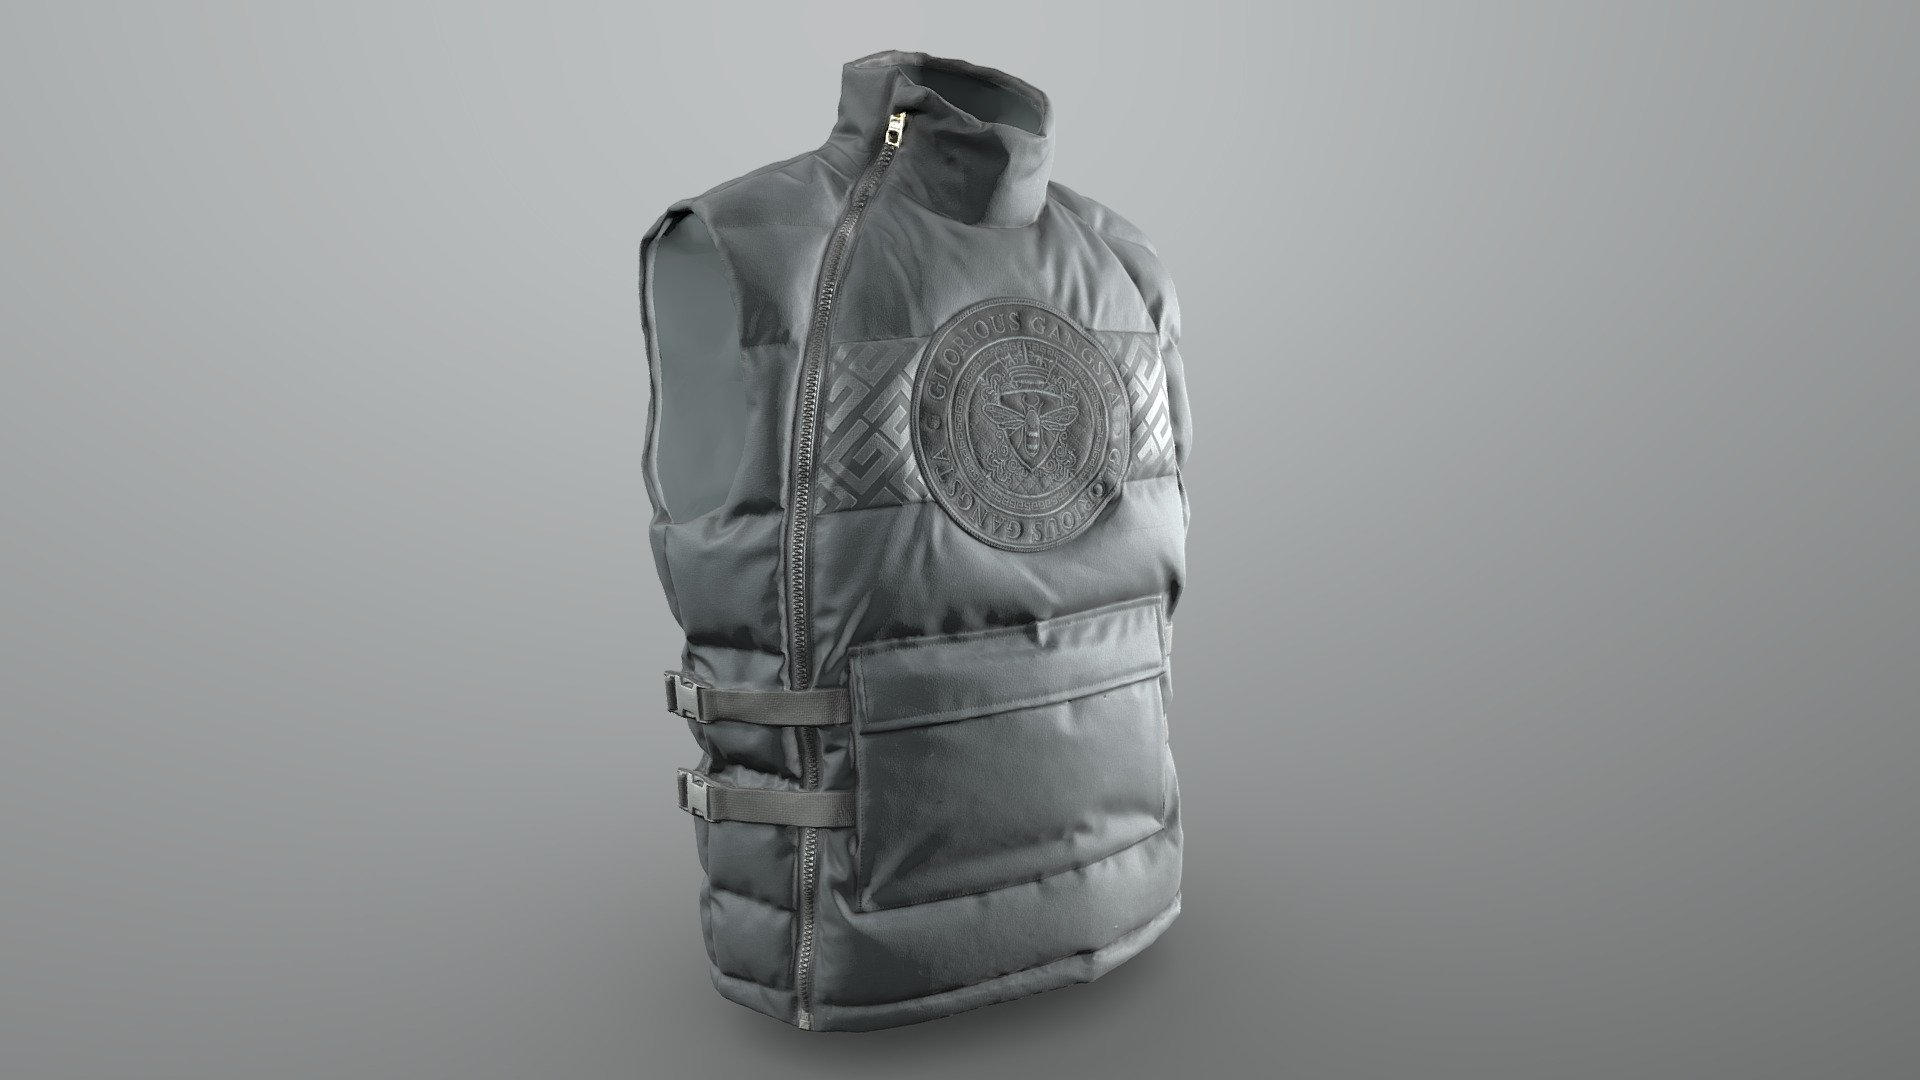 Realistic high detailed Vest model with high resolution textures. 
Model created by our unique semi-automatic scanning technology

Optimized for 3D web and AR / VR

=======FEATURES===========

The units of measurement during the creation process were milimeters.
Clean and optimized topology is used for maximum polygon efficiency.
This model consists of 1 meshes. 
The model has 2 materials
Includes high detailed normal map

Includes High detail 4096x4096 .png textures (diffuse (base color), Roughness, Metallness, Normal) 
60k polygons - Glorious Gangsta BAZIN GILLET - Vest - Black - Buy Royalty Free 3D model by VRModelFactory 3d model